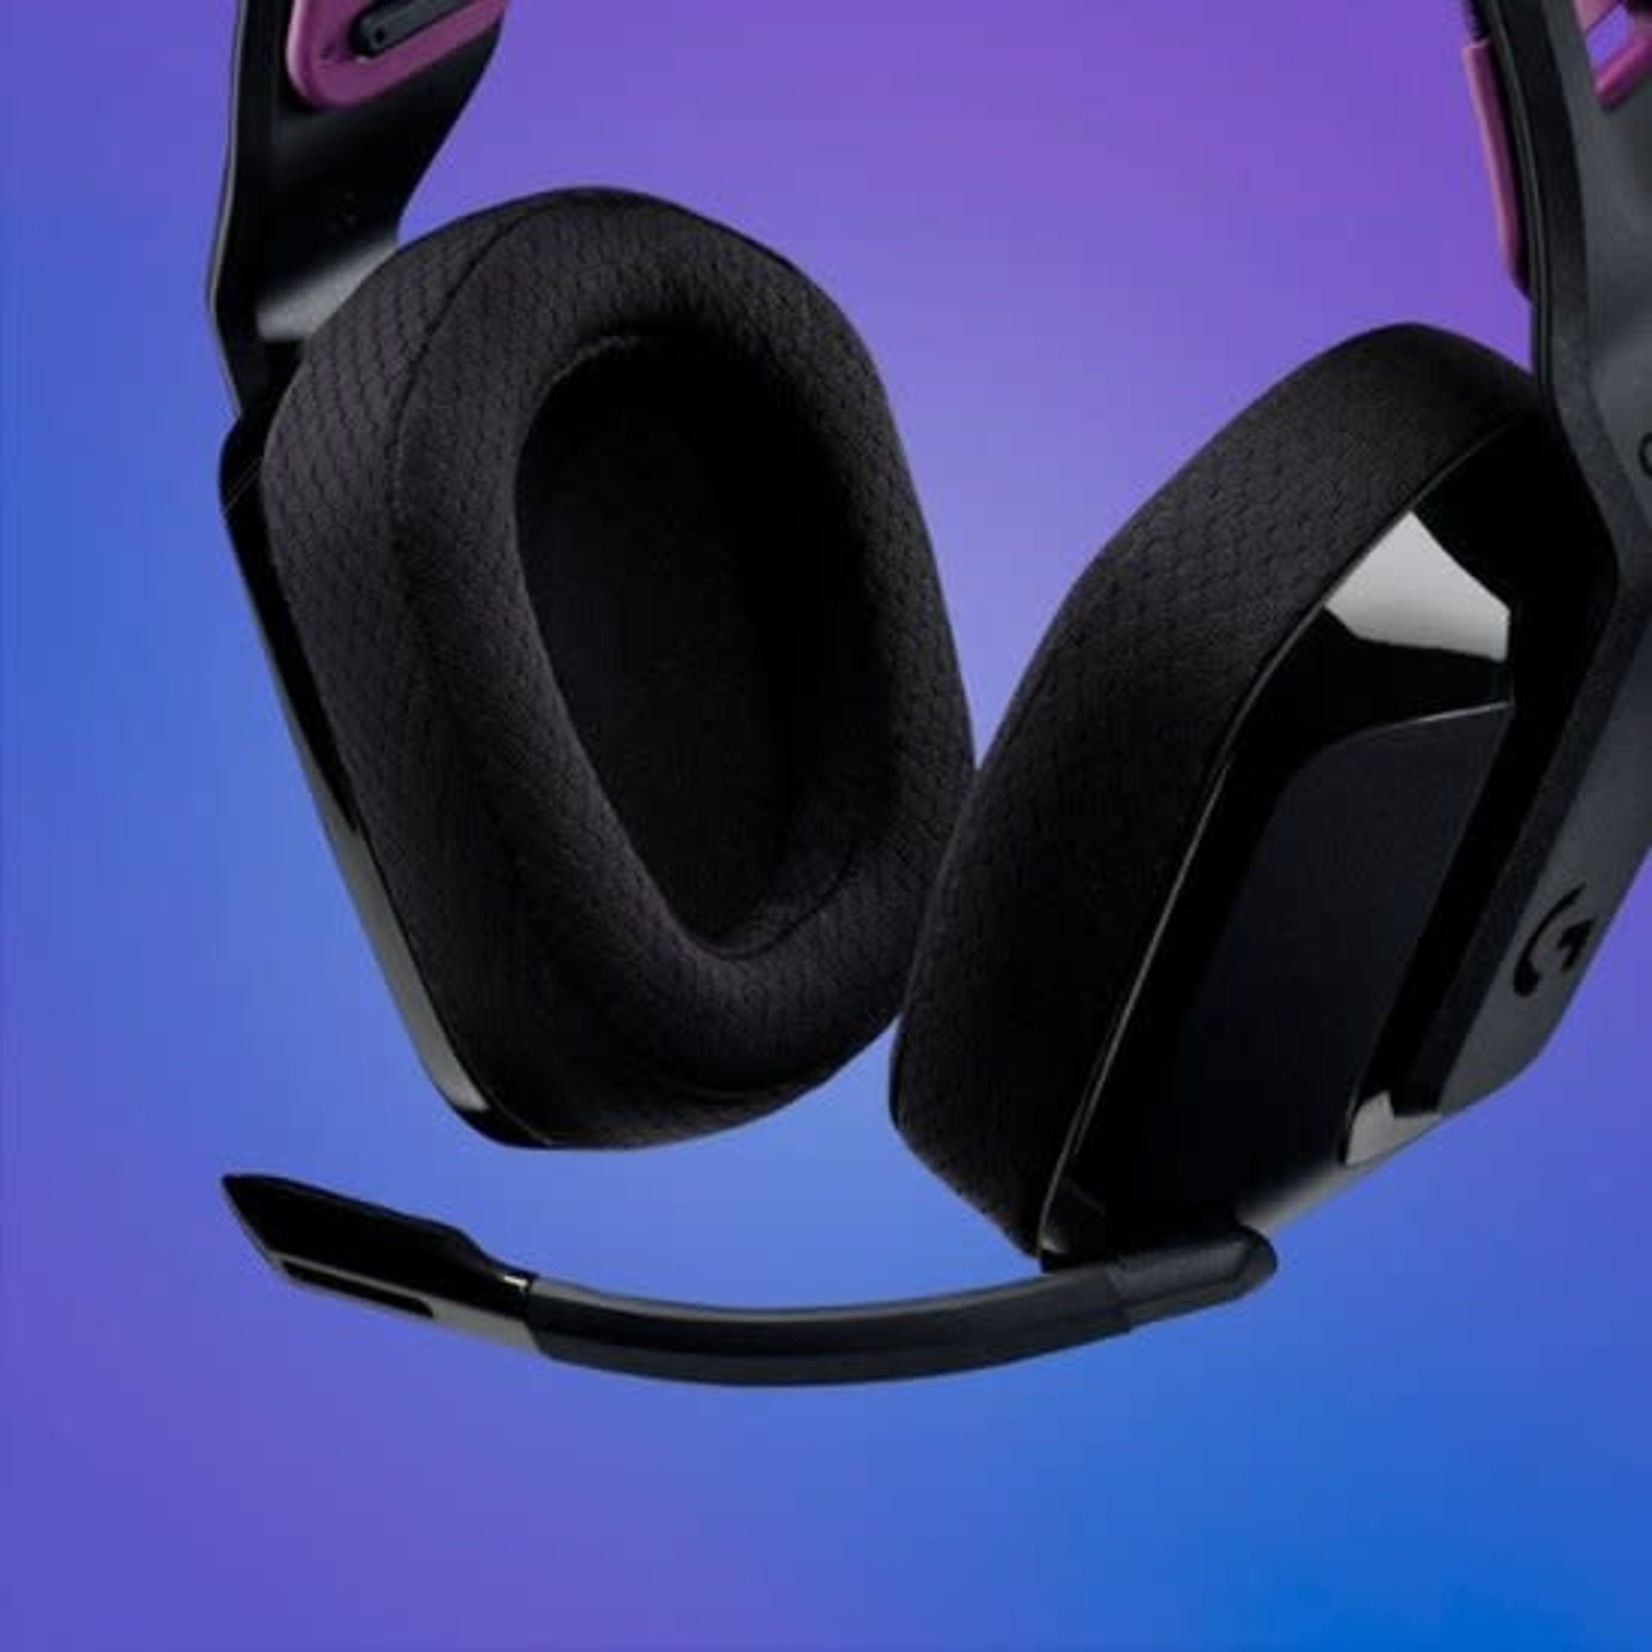 Logitech G535 Lightspeed Wireless Dolby Atmos Over-the-Ear Gaming Headset